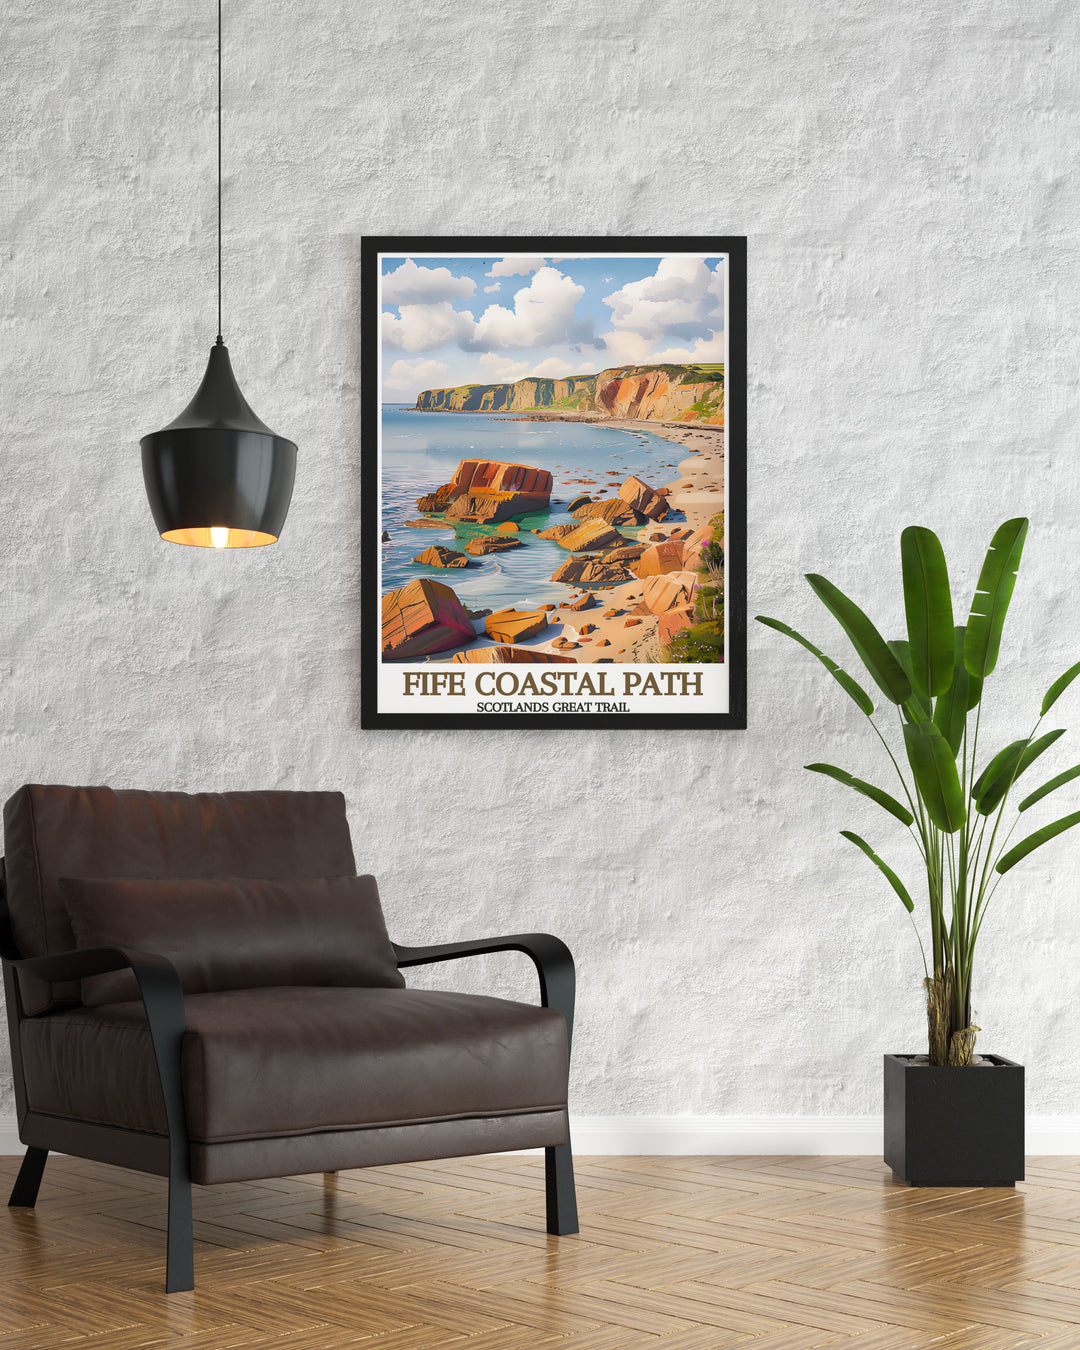 The natural beauty and dramatic landscapes of Scotland are celebrated in this poster, featuring the iconic Fife Coastal Path and inviting you to explore its breathtaking views.